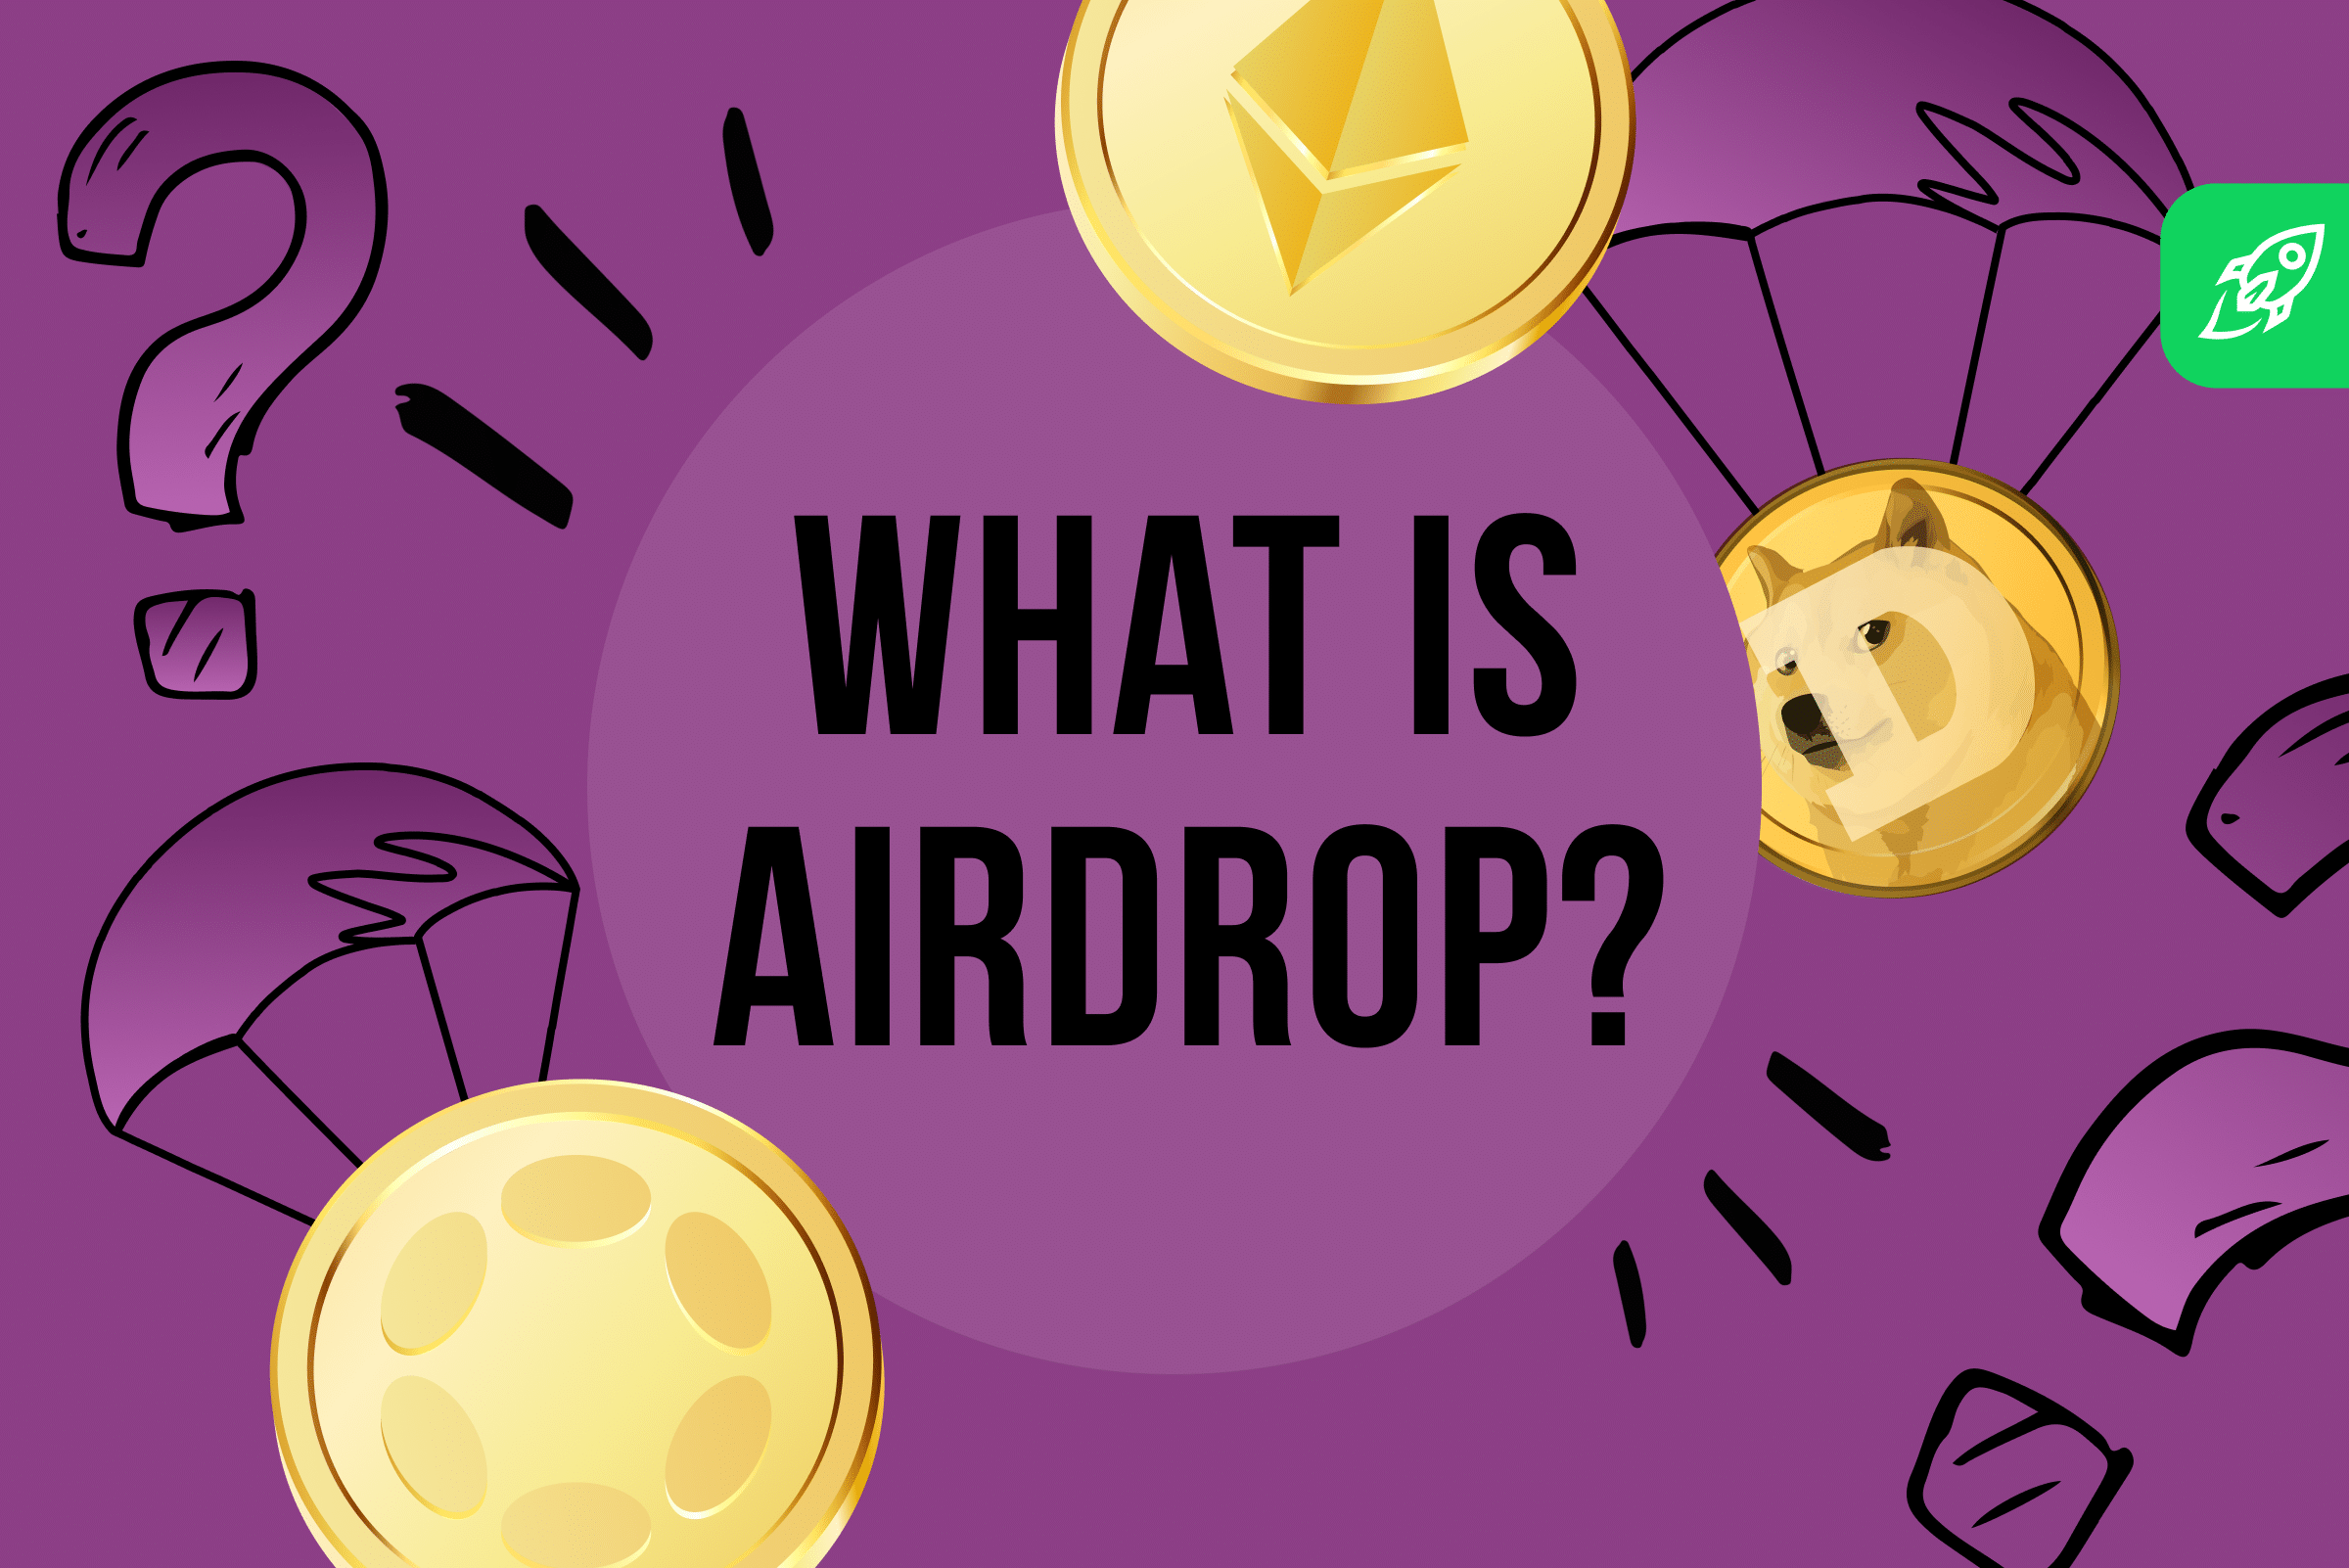 hydro coin airdrop